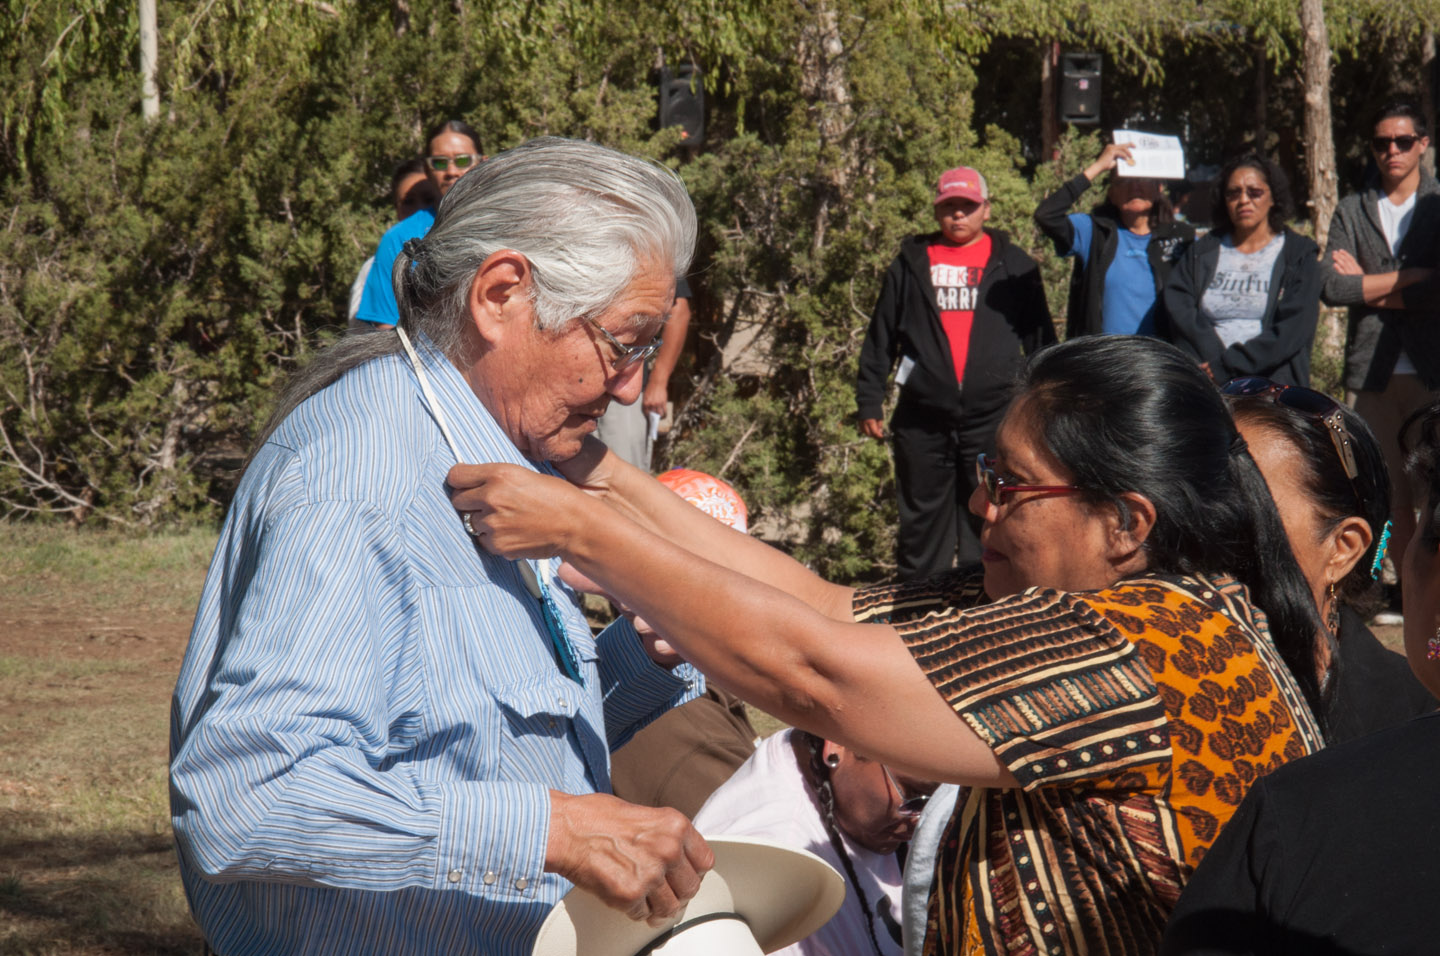 Southern Ute elder Alden Naranjo Jr., who ran the ceremony, accepts a beaded necklace from the family of one of the honorees.